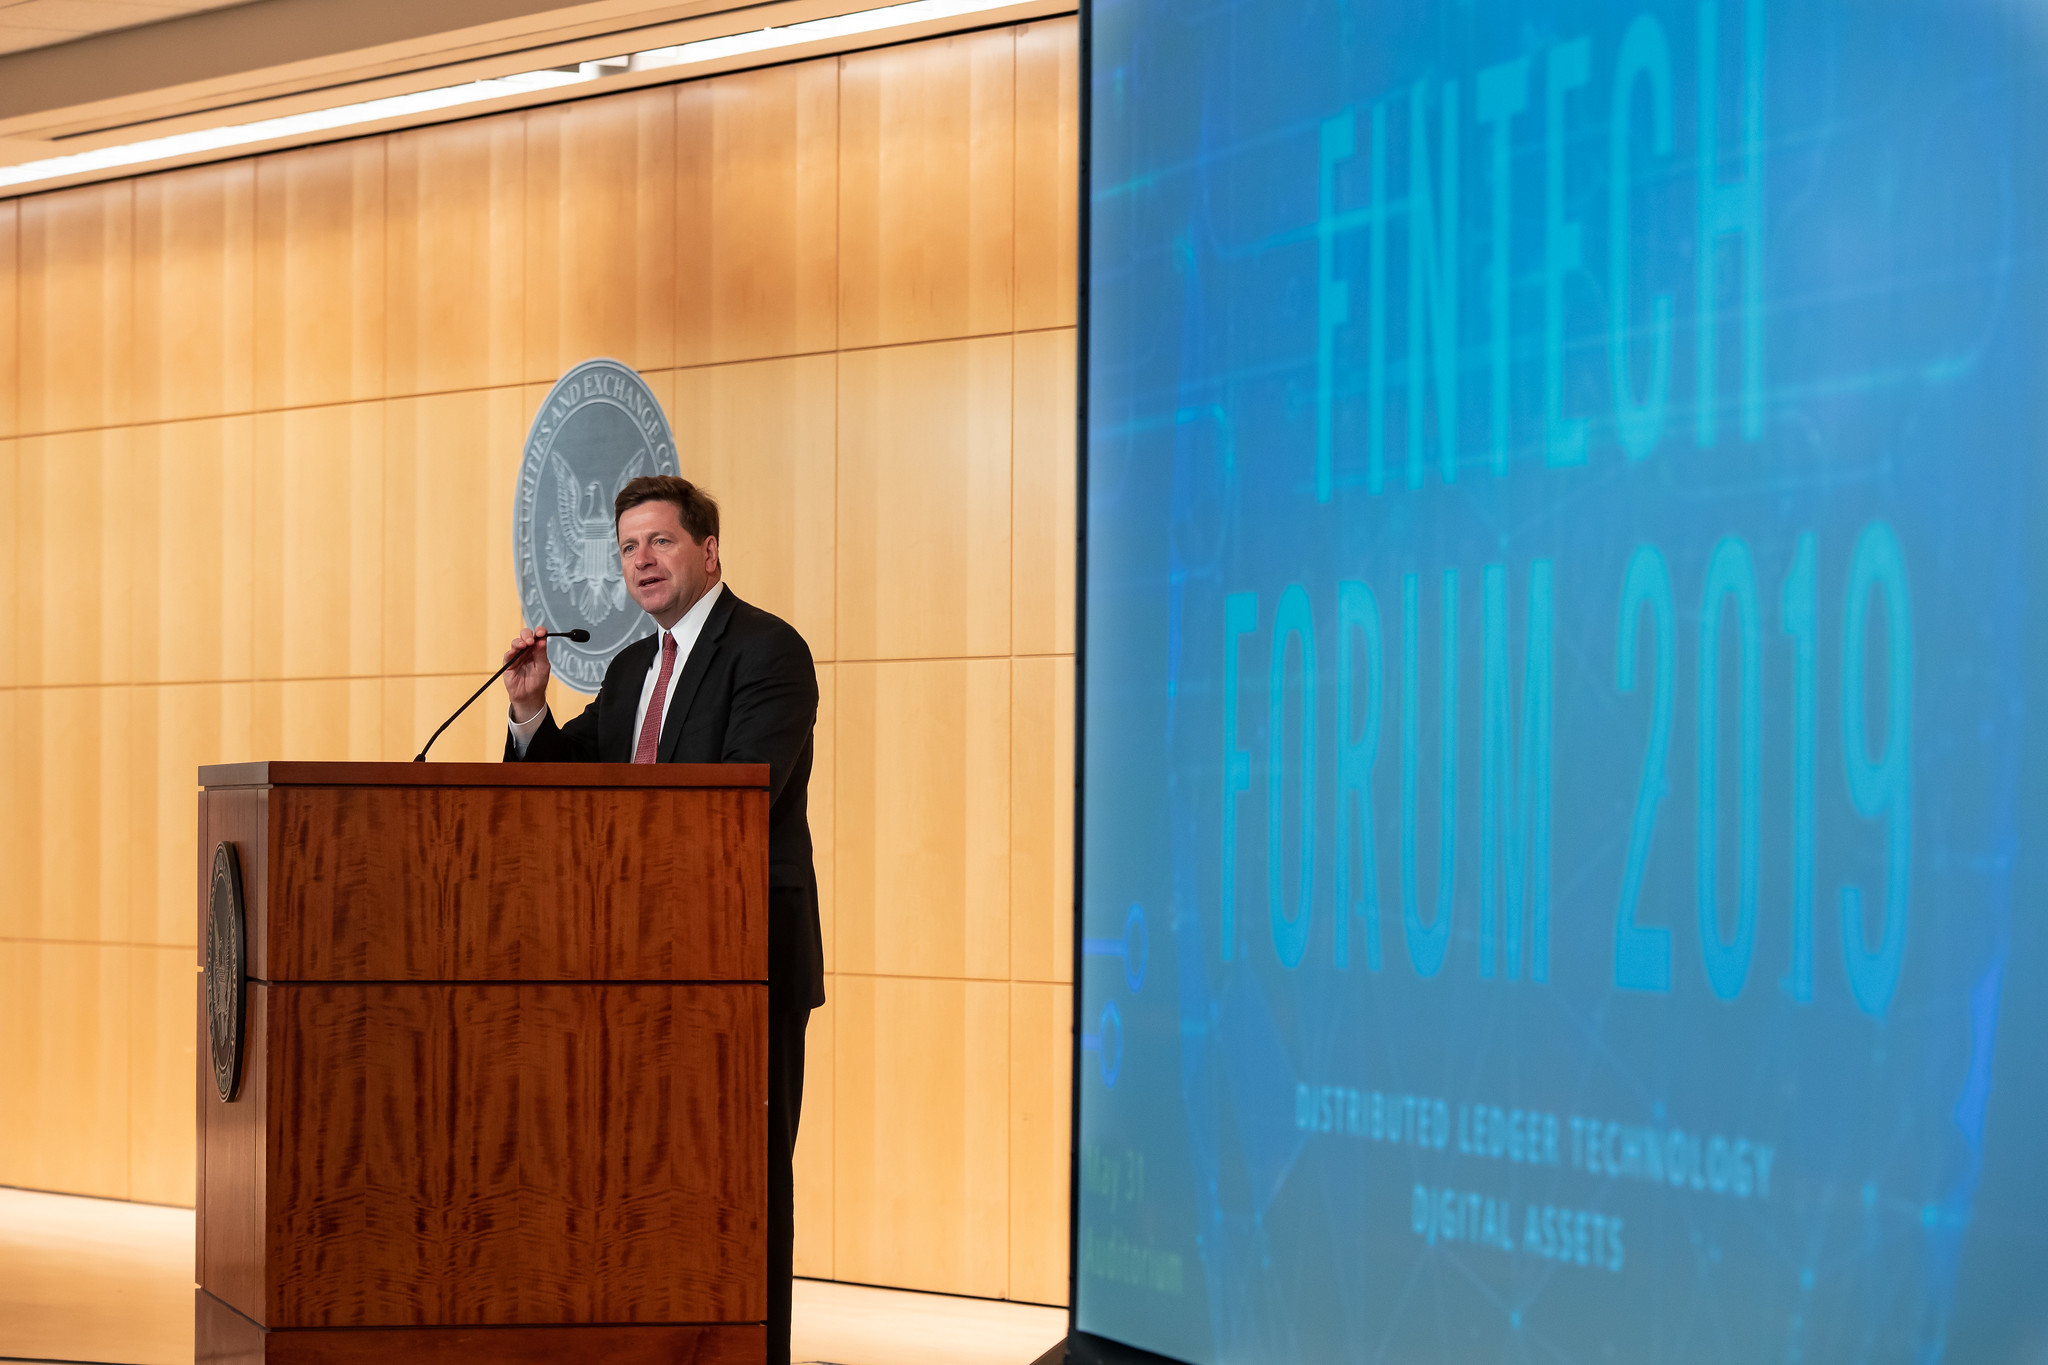 chairman Jay Clayton at the Fintech Forum